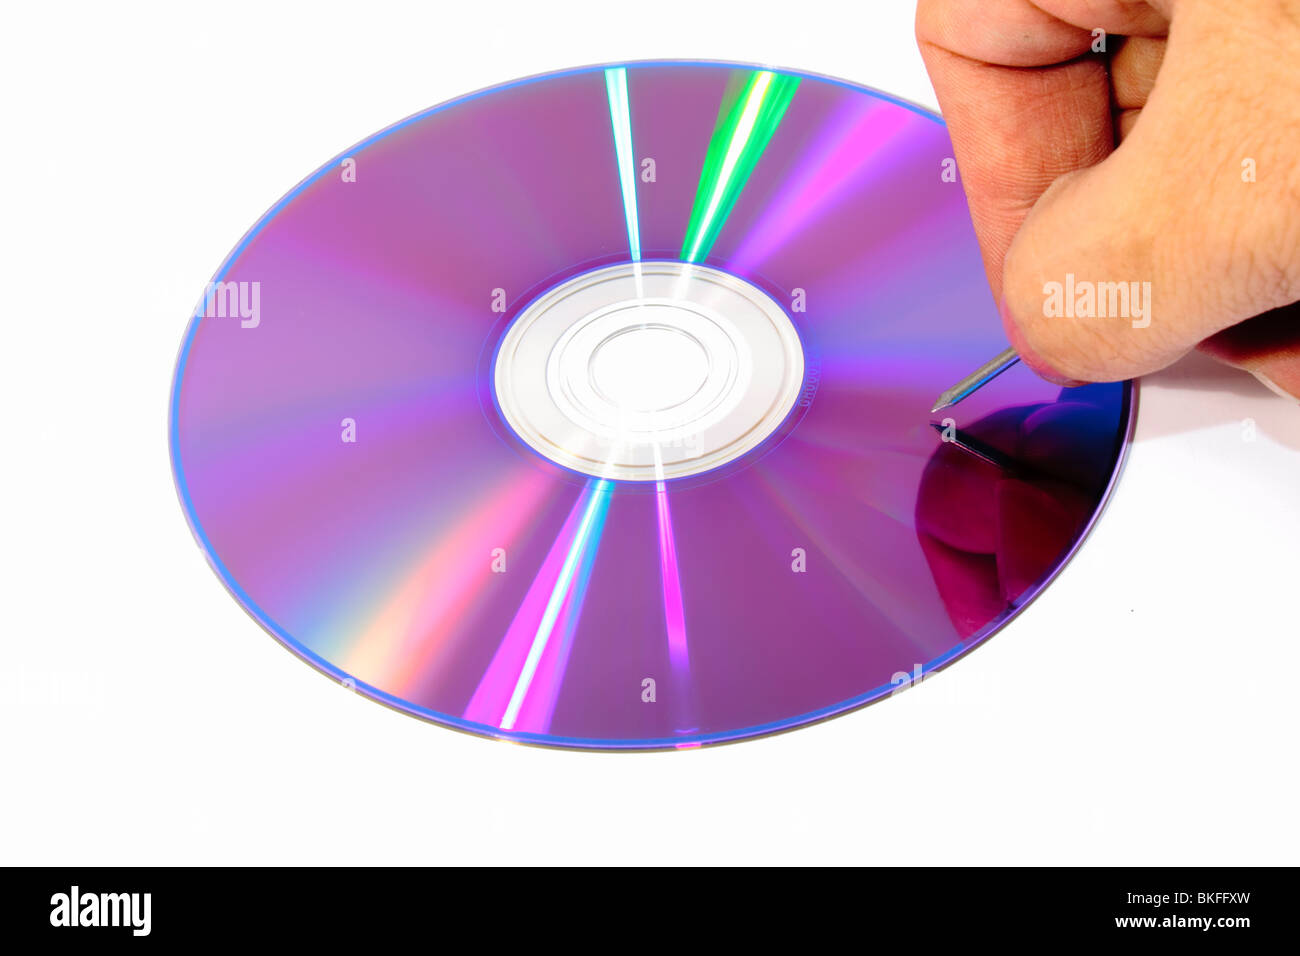 Bottom of a DVD with a nail ready to scratch it Stock Photo